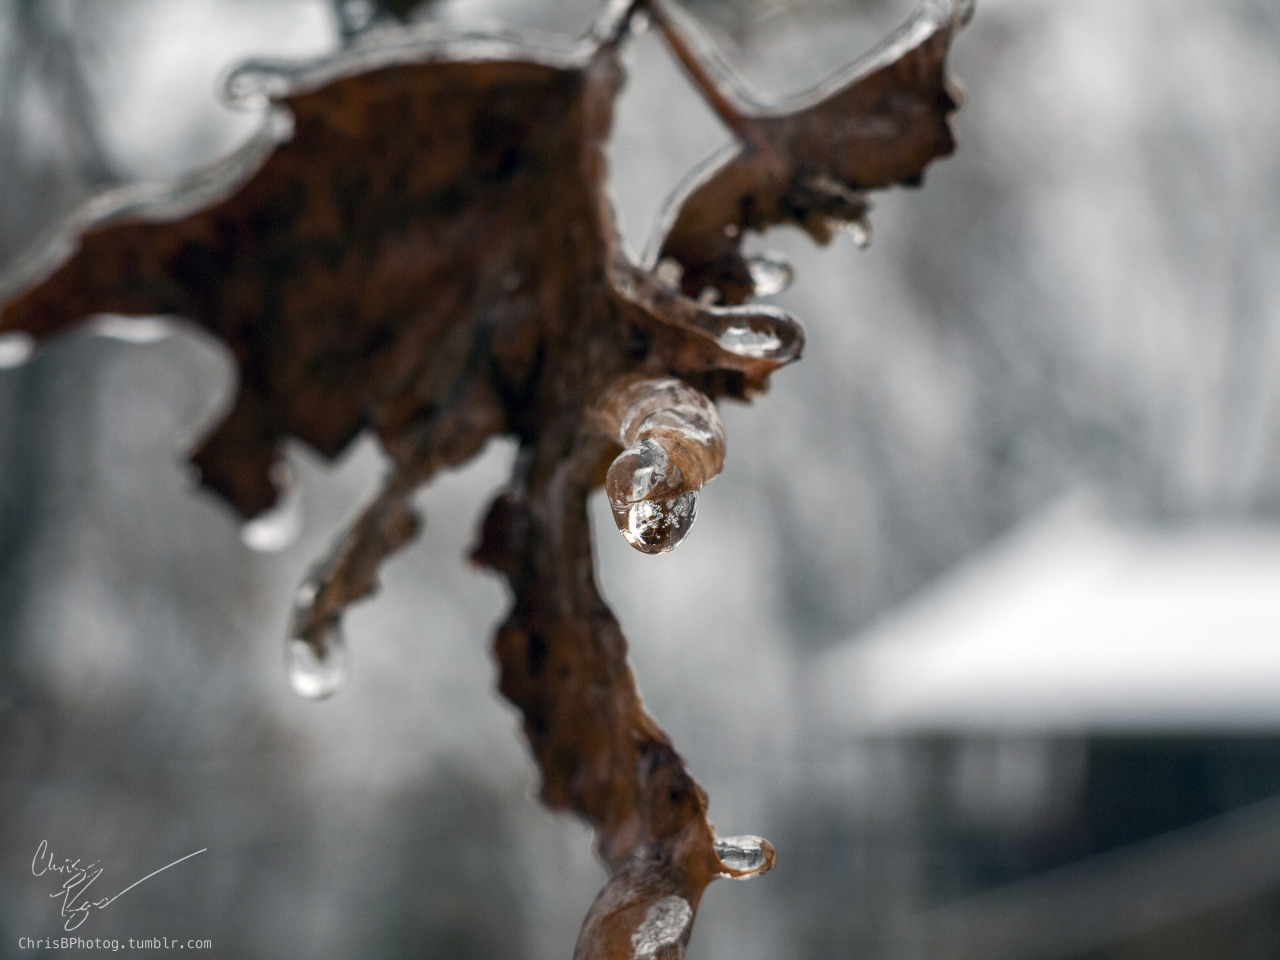 Freezing rain is pretty. But it does cause problems